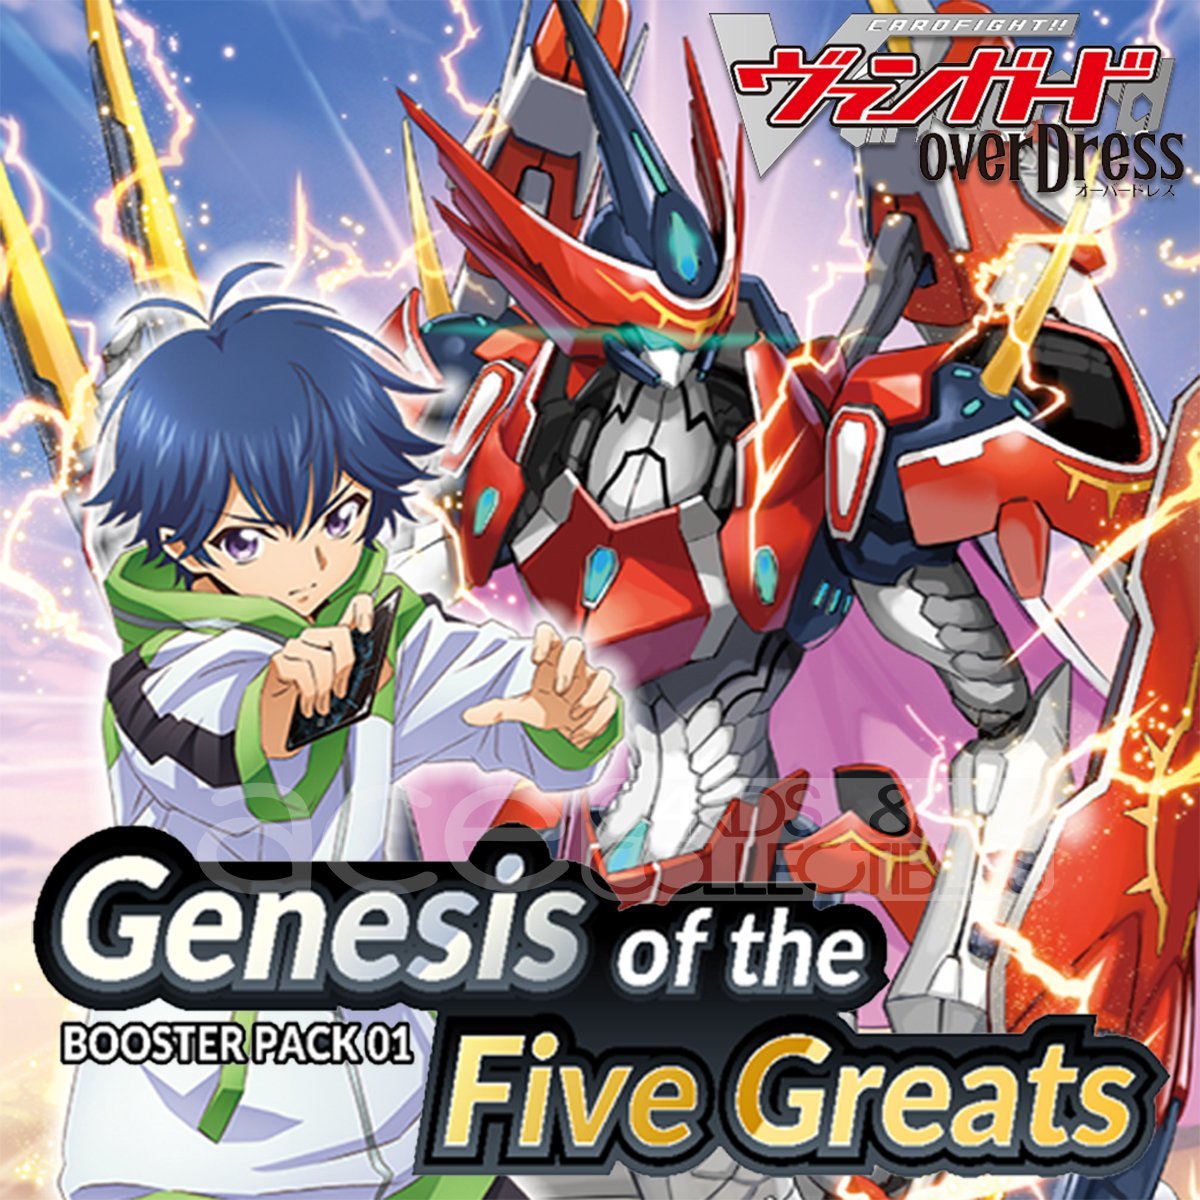 Cardfight!! Vanguard overDress Booster 01 Genesis of the Five Greats [VGE-D-BT01] (English)-Booster Pack (Random)-Bushiroad-Ace Cards & Collectibles